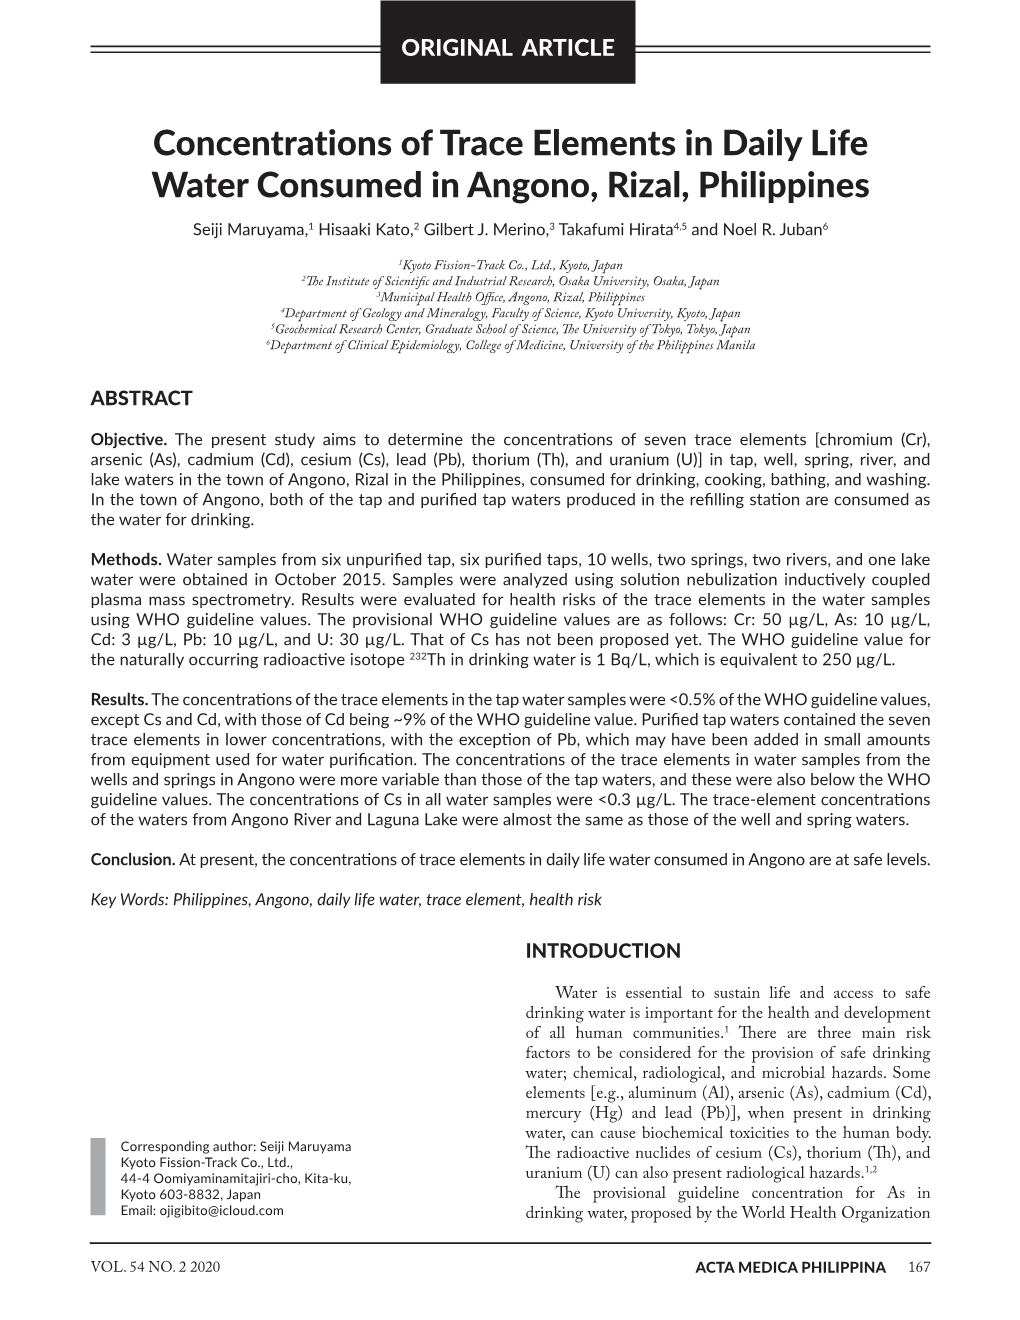 Concentrations of Trace Elements in Daily Life Water Consumed in Angono, Rizal, Philippines Seiji Maruyama,1 Hisaaki Kato,2 Gilbert J